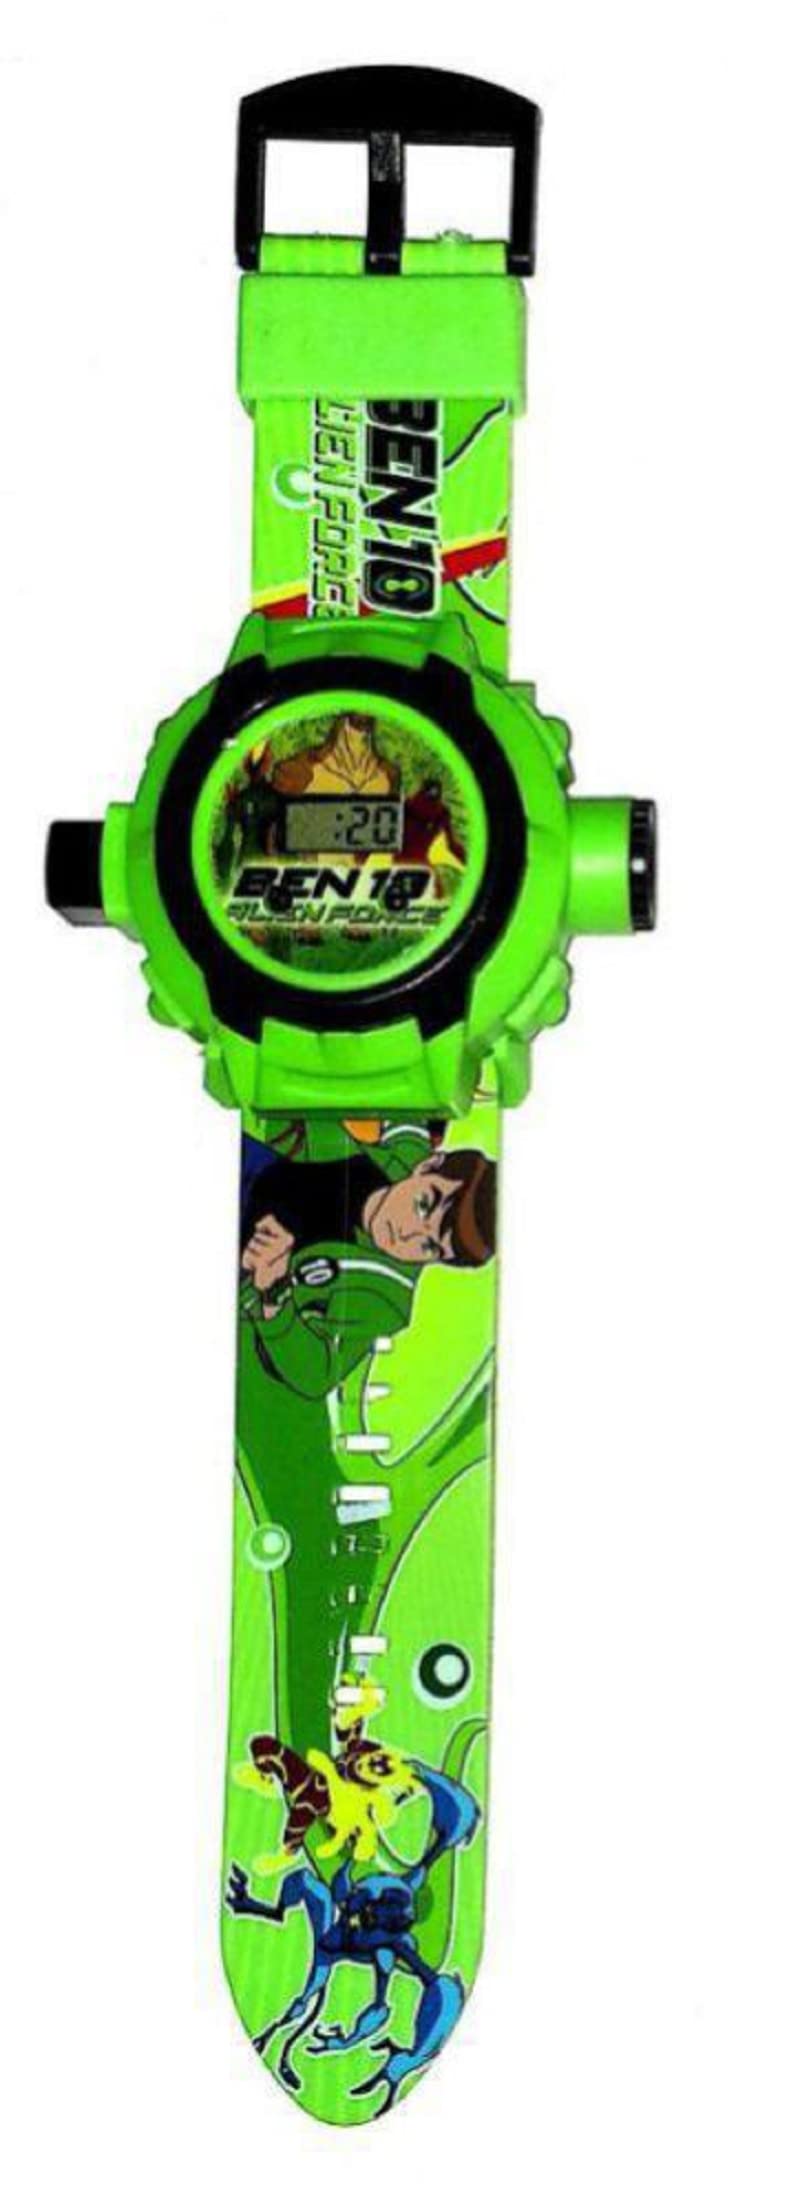 BEN 10-24 Images Projector Watch Digital Wrist Watch for Boys and Girls Gift X-mas Gift